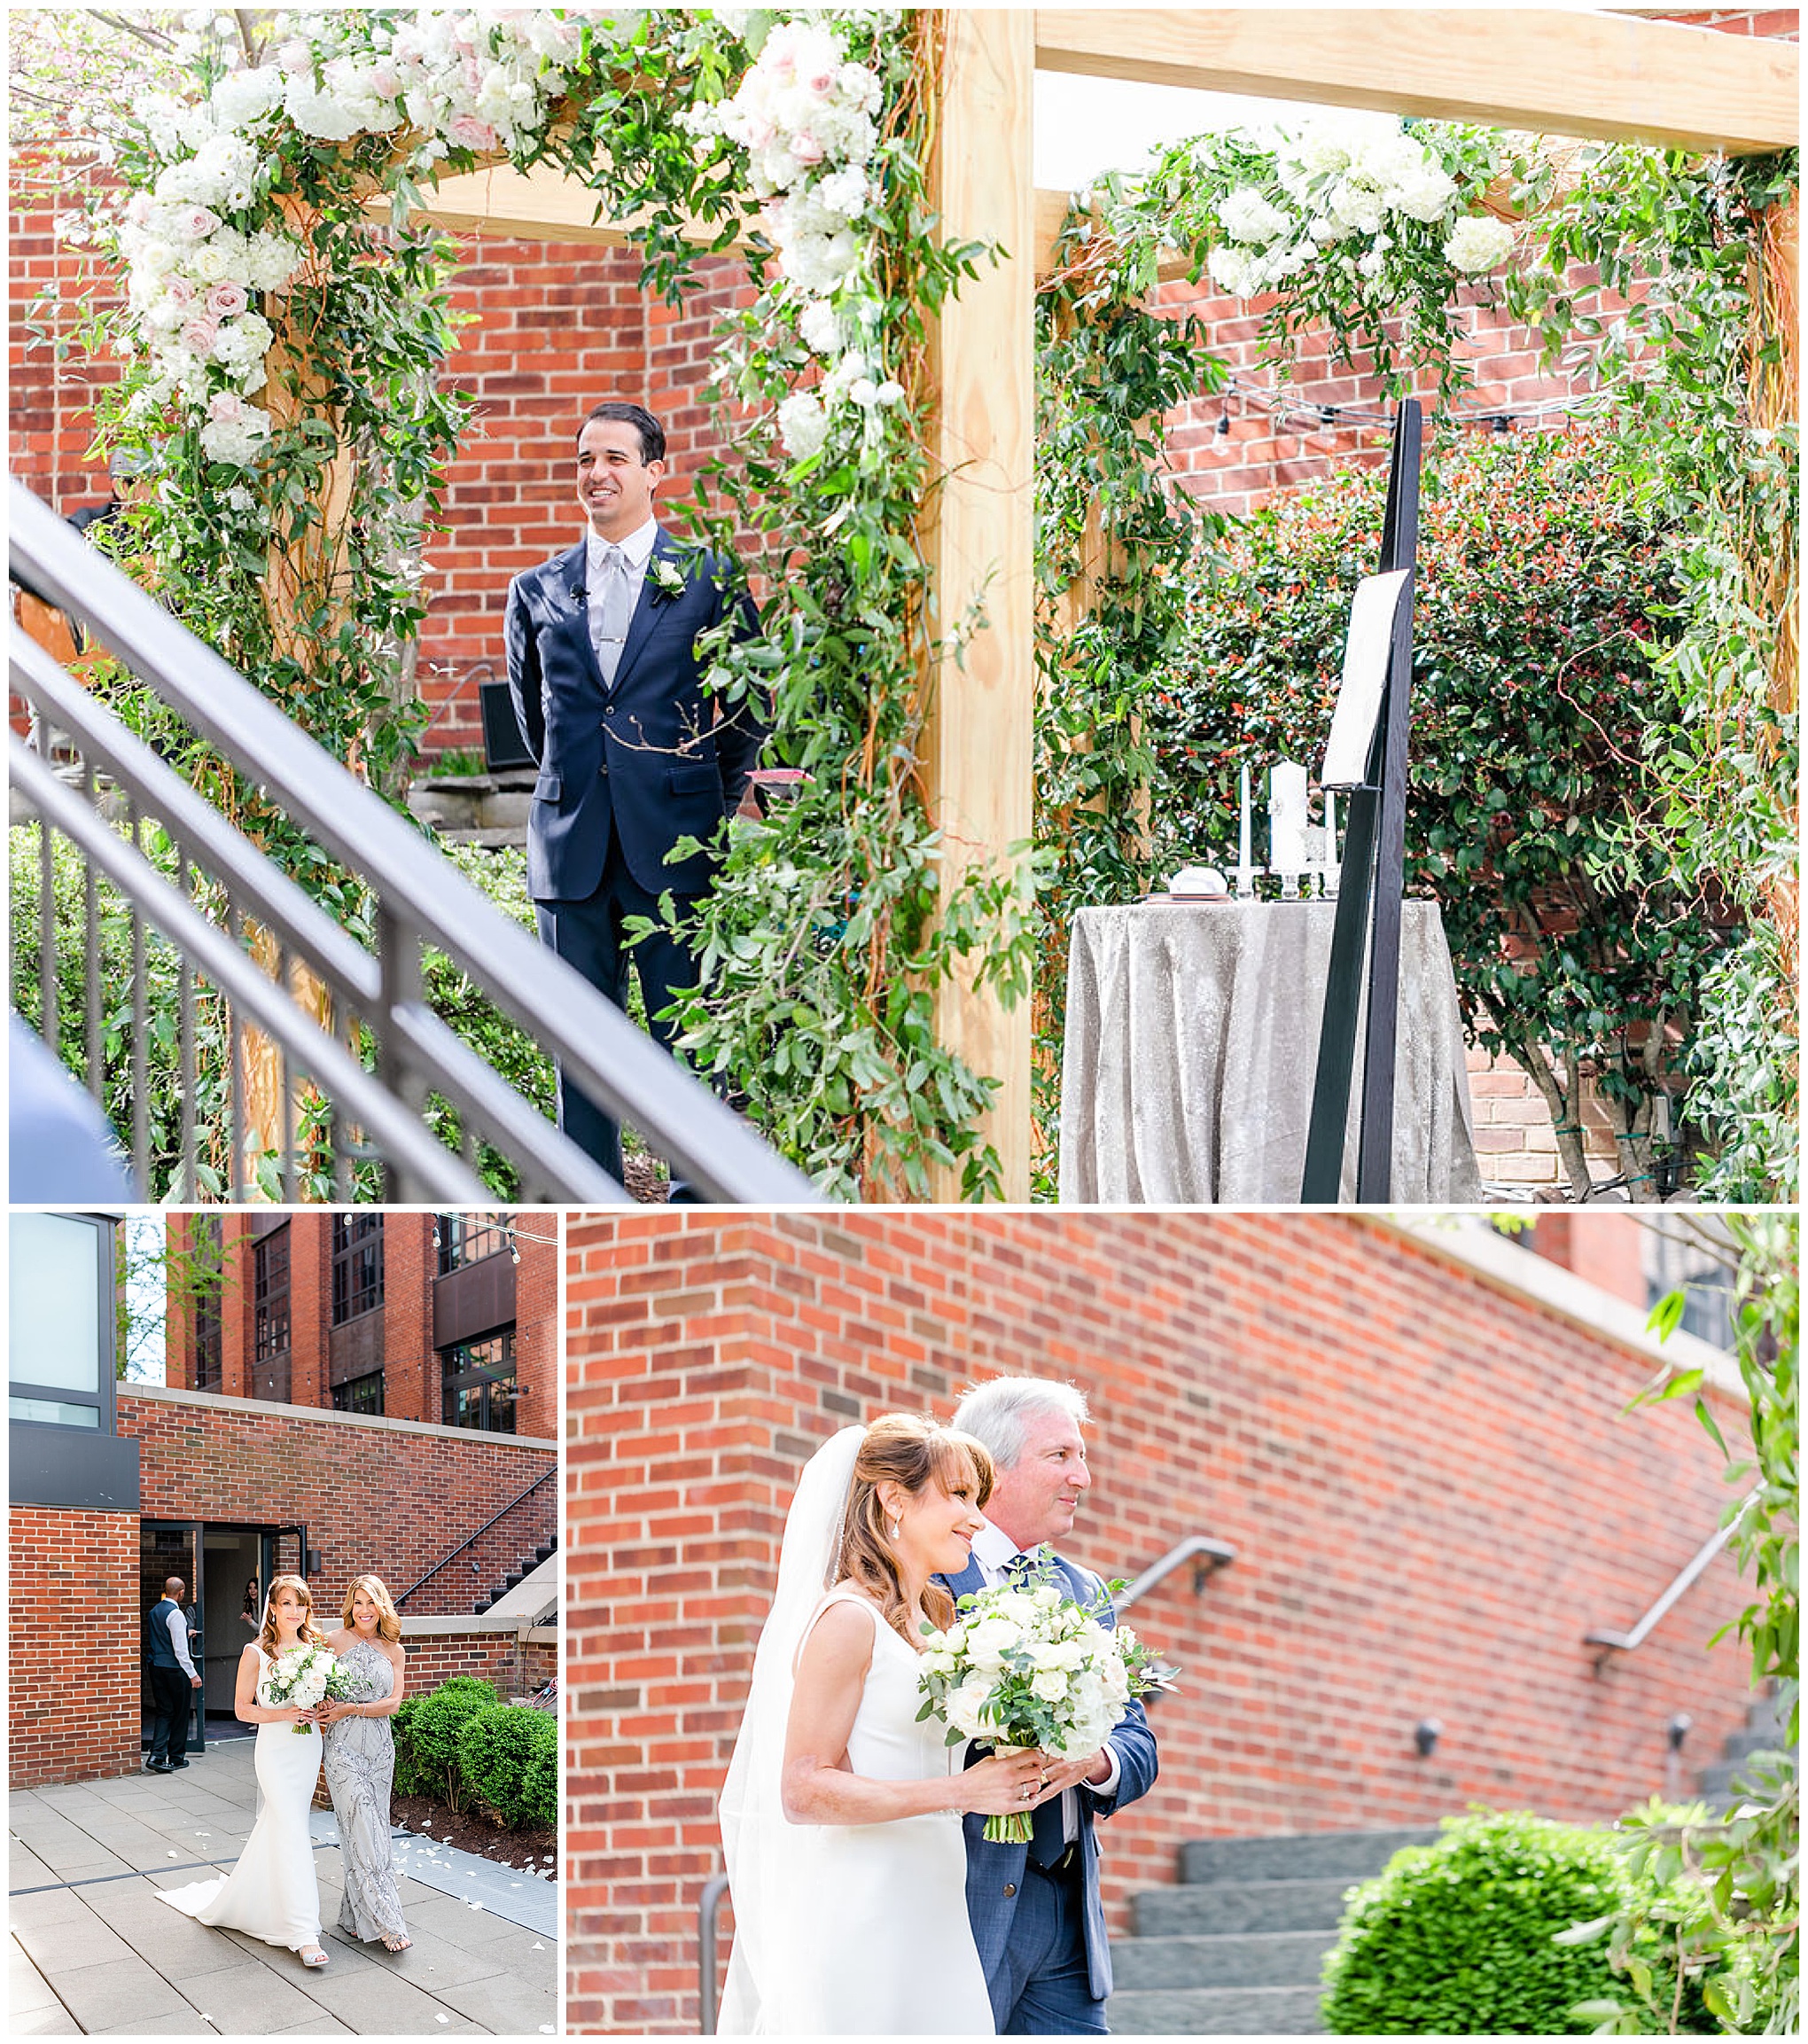 spring Ritz Carlton Georgetown wedding, Georgetown DC wedding, Georgetown Bride, Georgetown couple, DC couple, DC wedding venue, spring wedding, floral focused wedding, classic DC wedding, Ritz Carlton wedding, DC wedding photographer, Georgetown wedding photographer, Rachel E.H. Photography, bride walking down aisle with mother and father